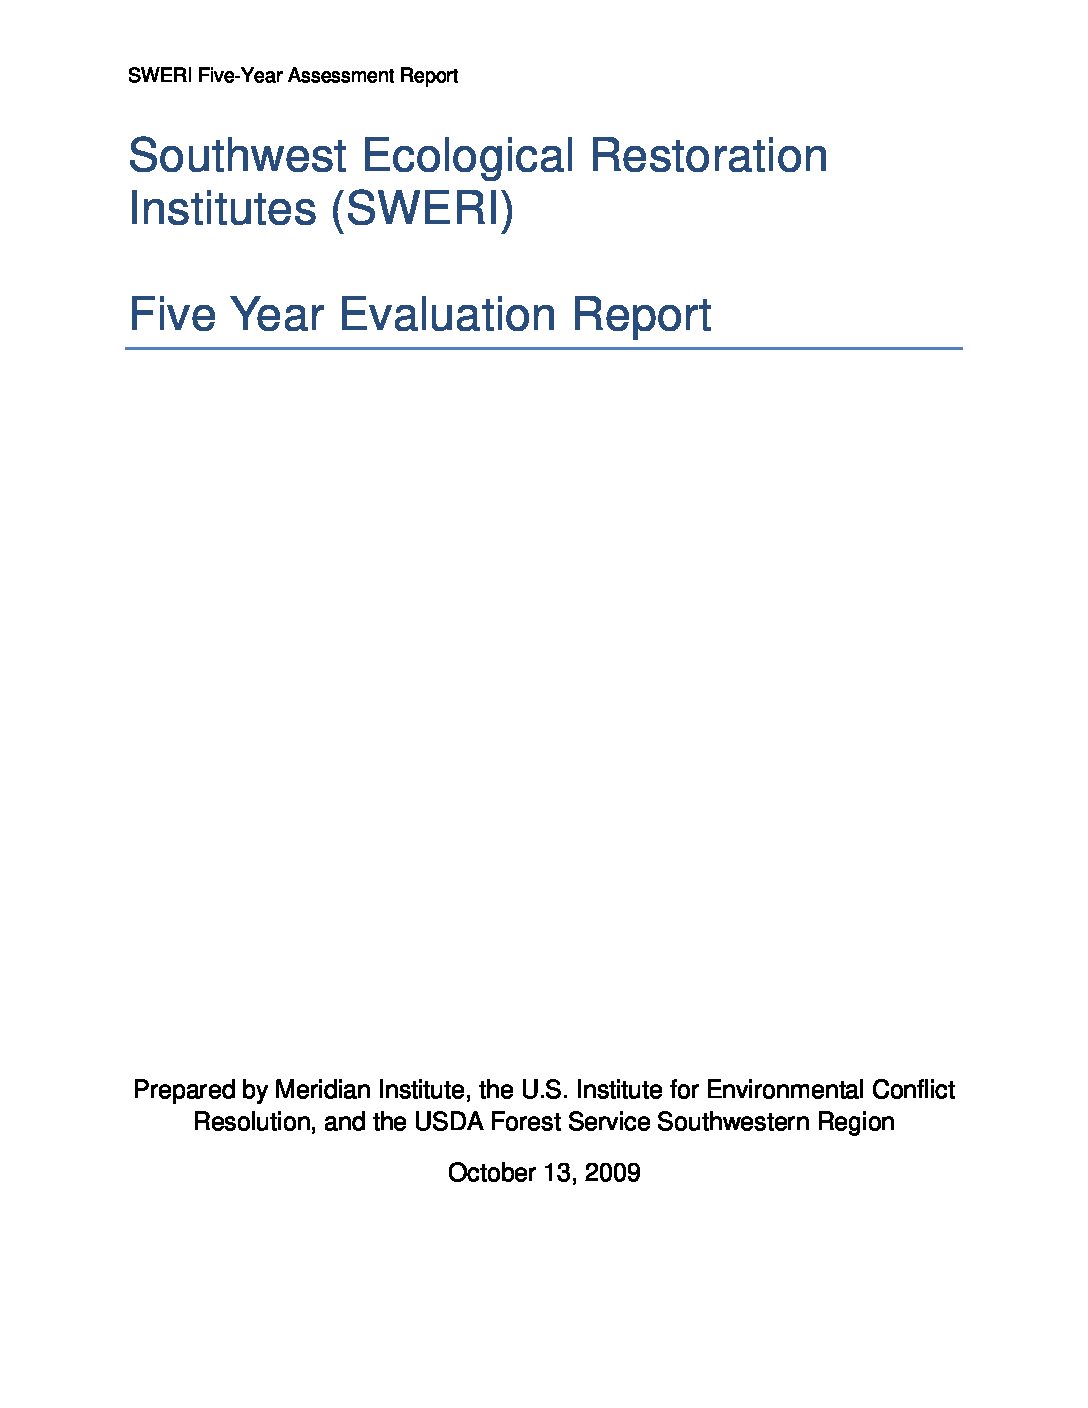 Southwest Ecological Restoration Institutes Evaluation Report for the years 2004-2009